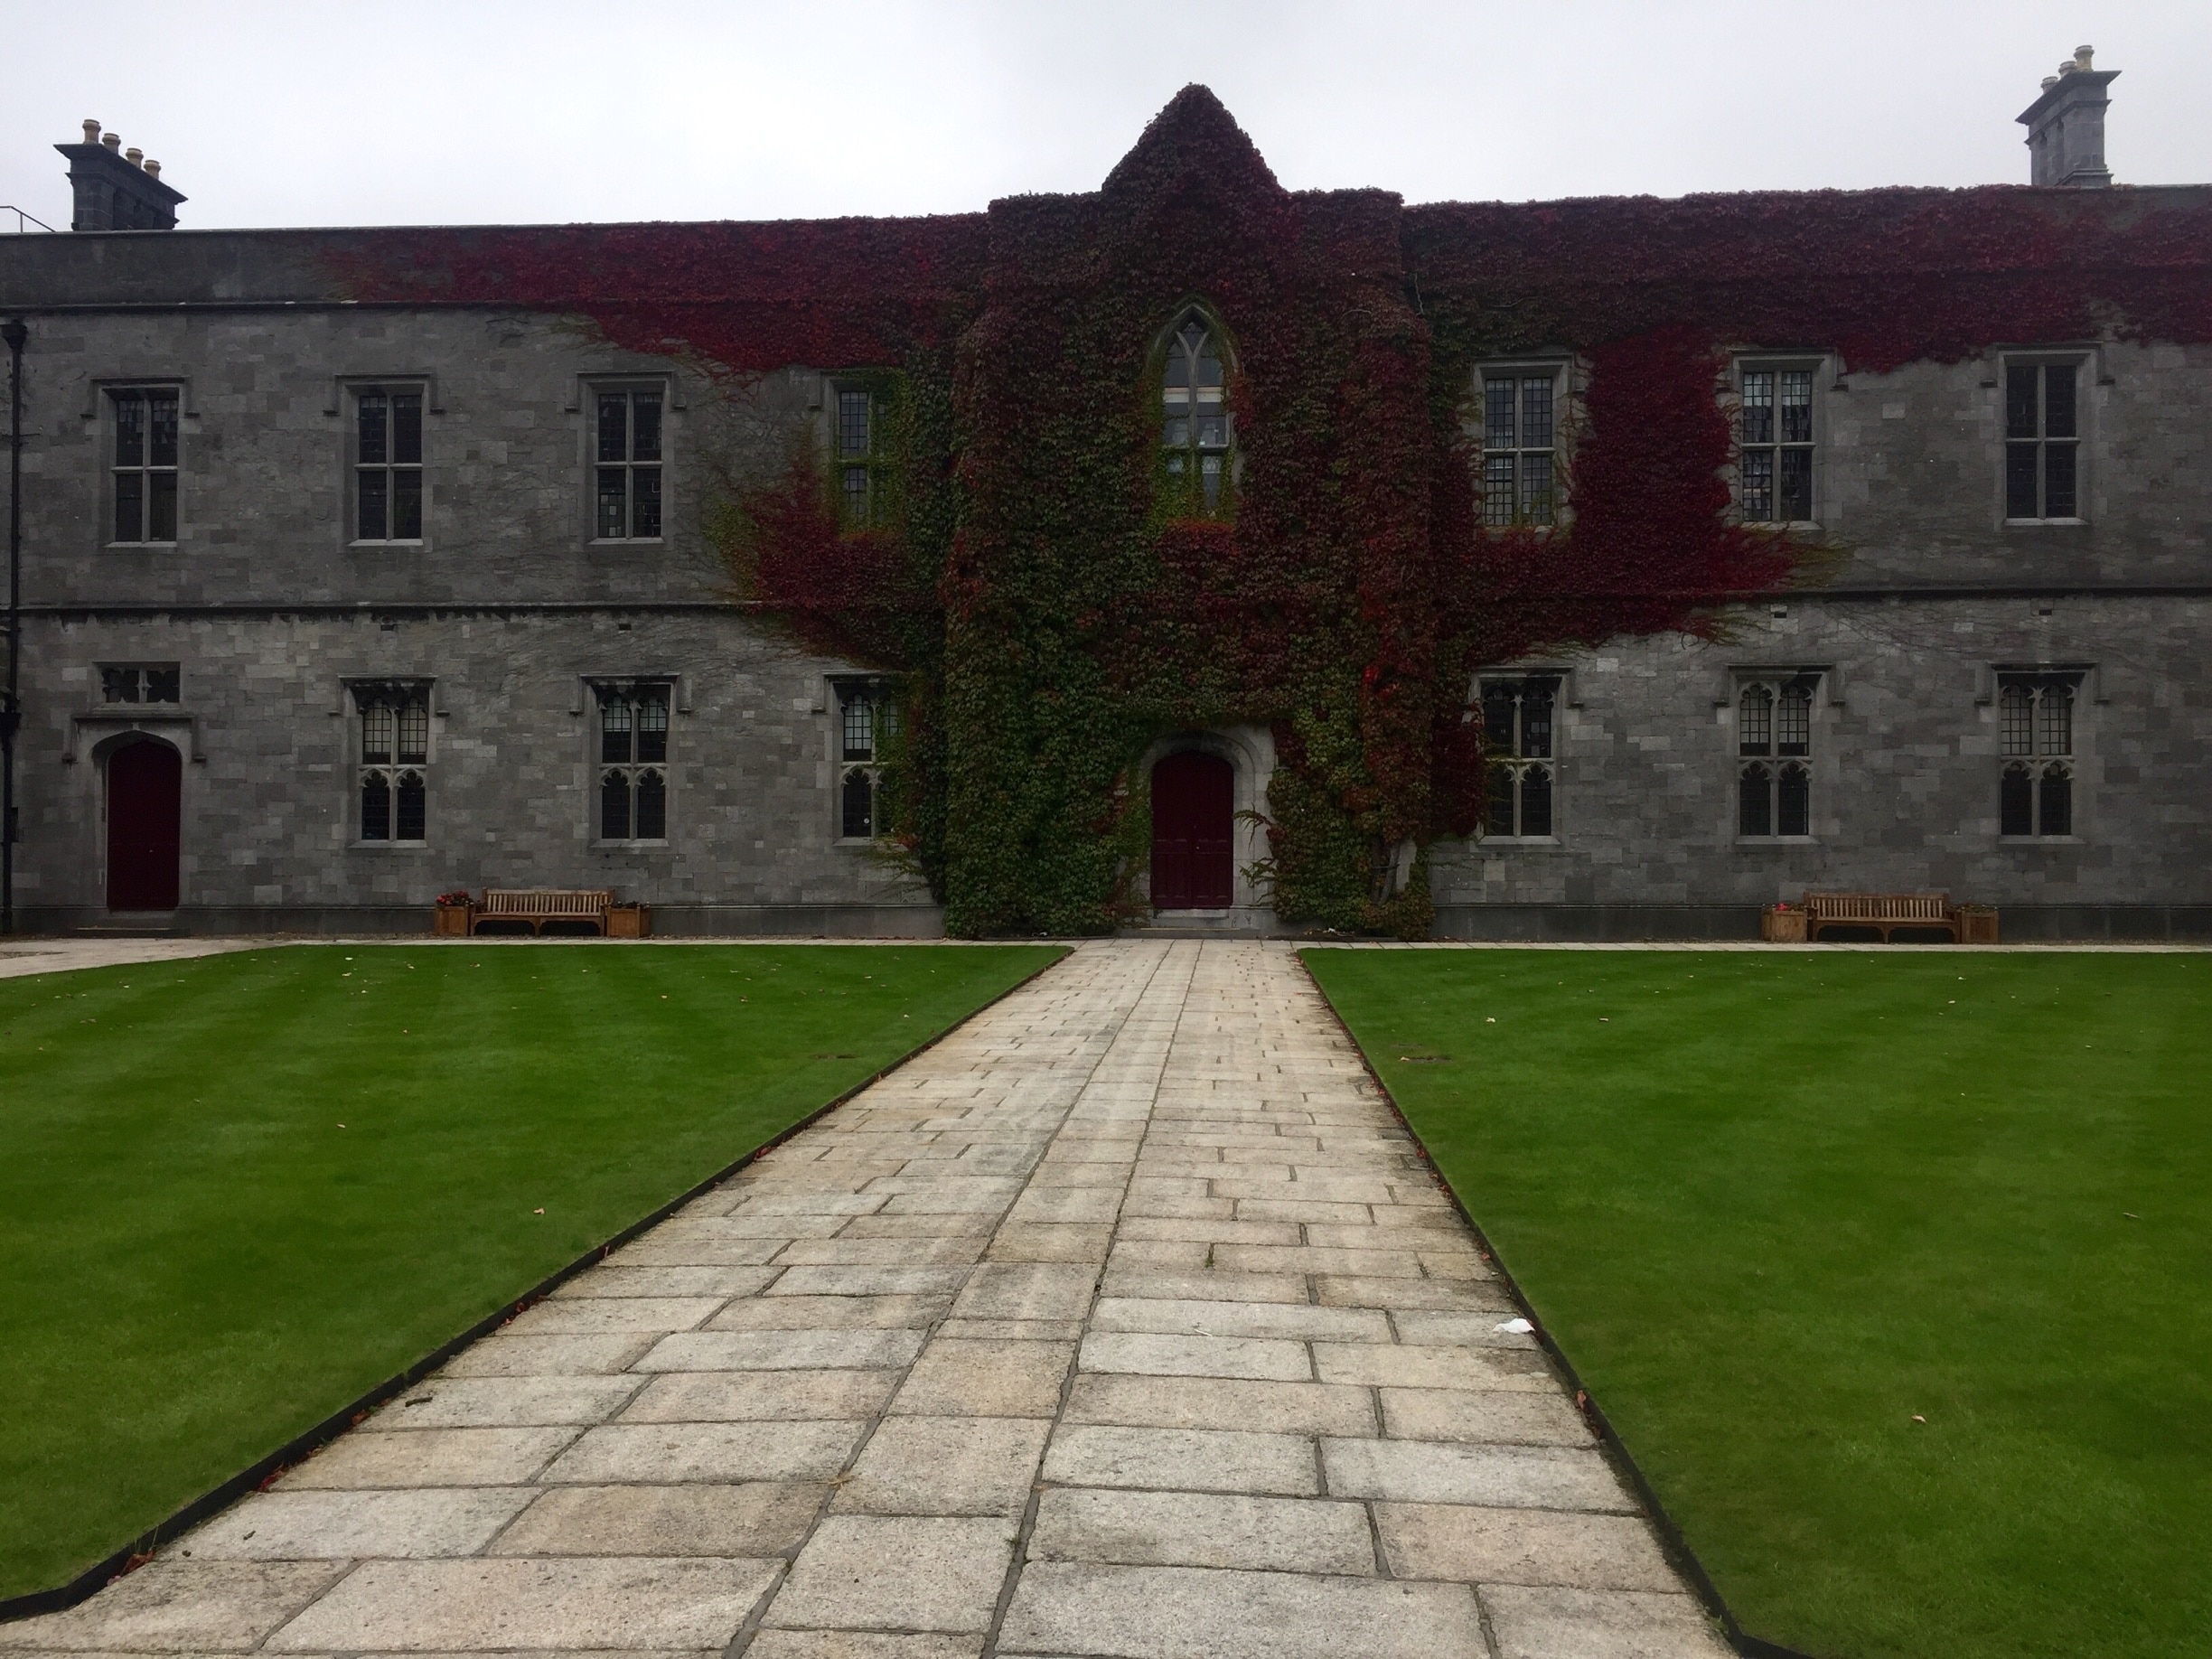 The quadrangle at the National University or Ireland at Galway. Can't believe I get to call this place my school for the next year! 